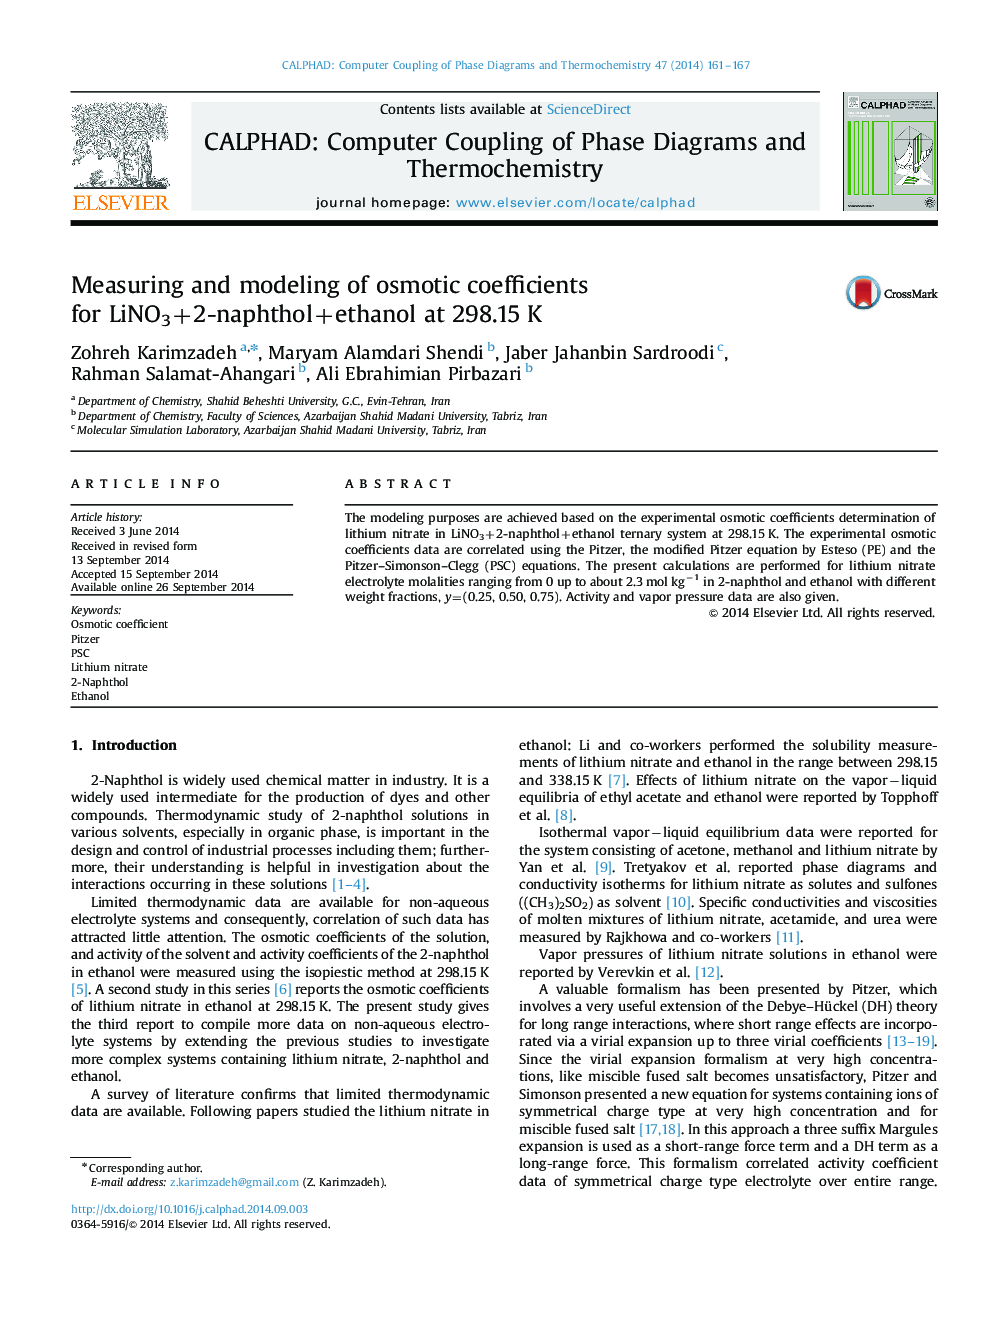 Measuring and modeling of osmotic coefficients for LiNO3+2-naphthol+ethanol at 298.15Â K